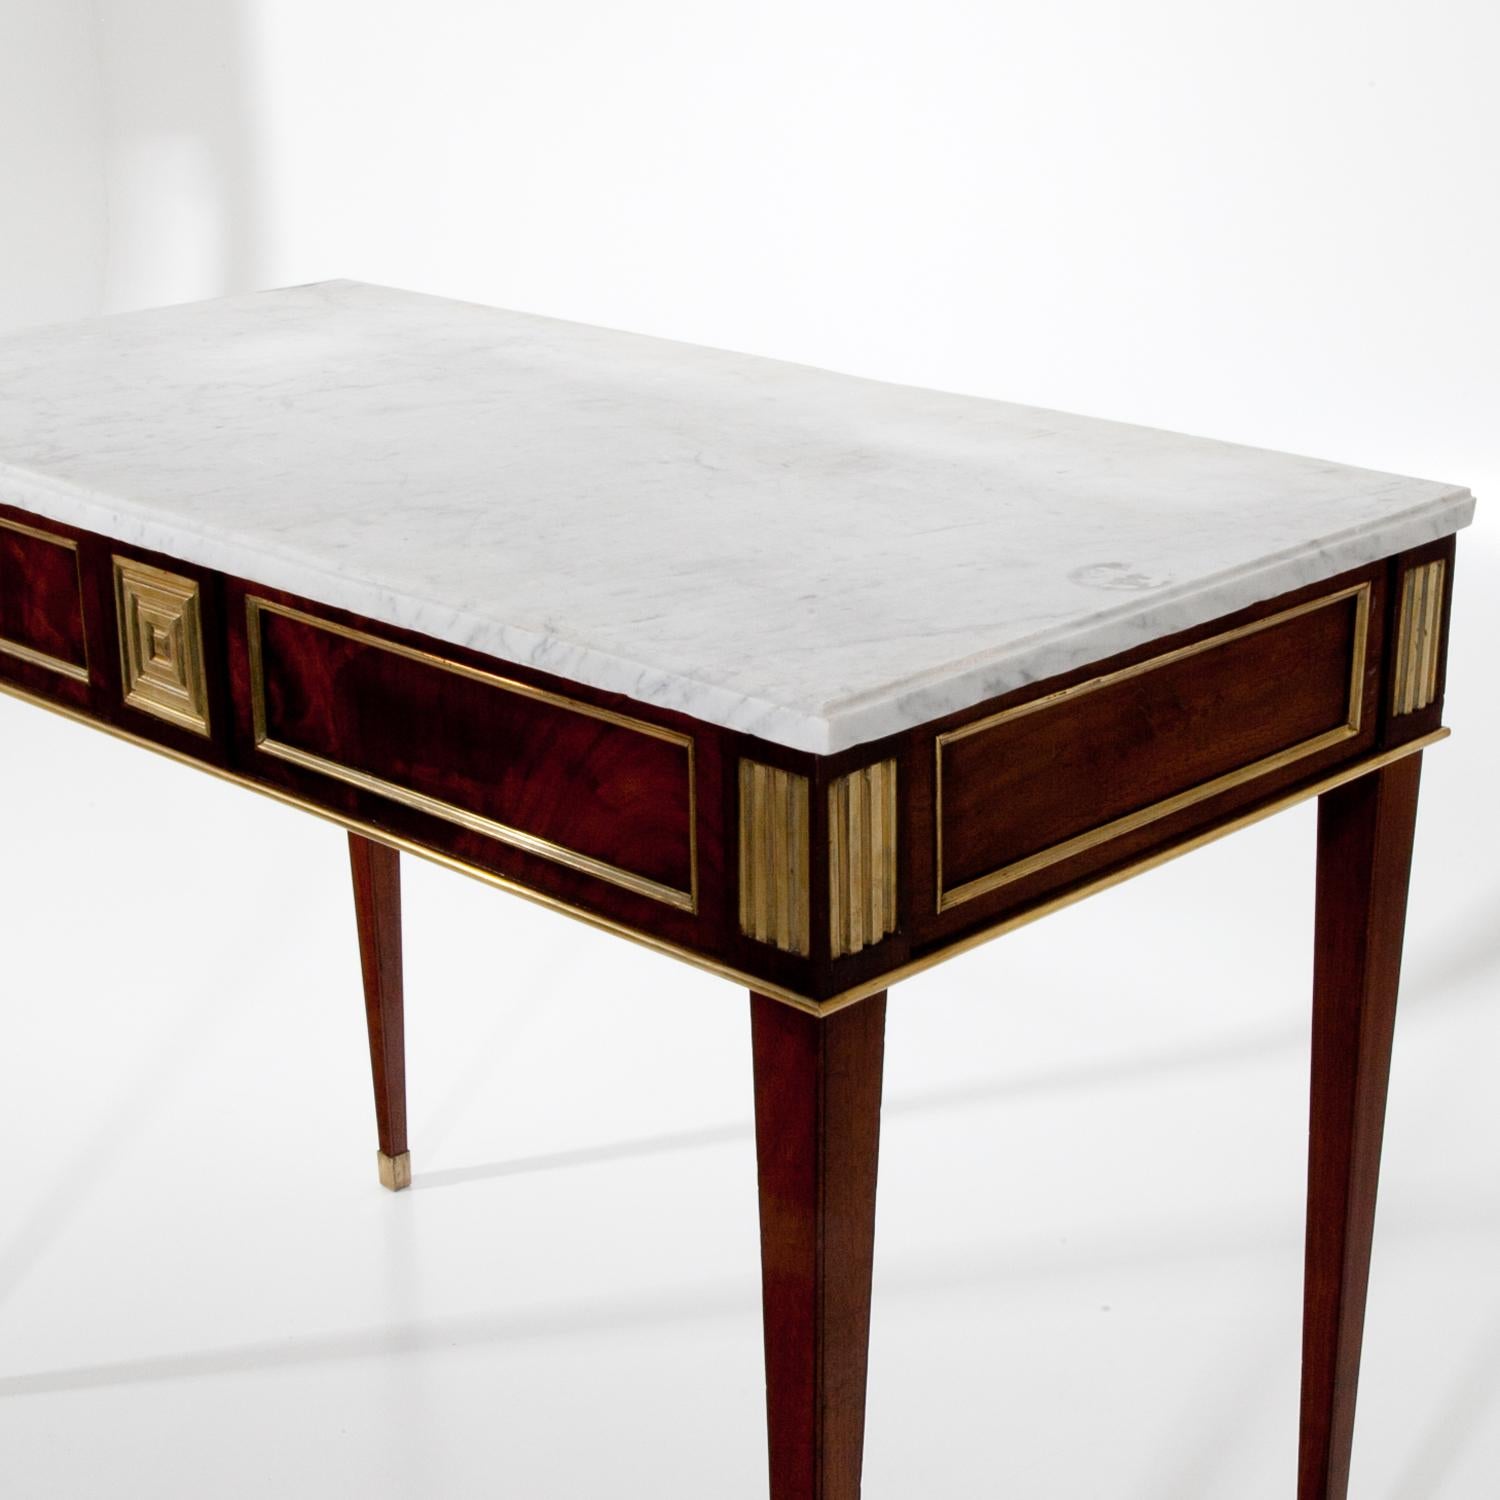 Early 19th Century Console Table, Baltic States, circa 1800